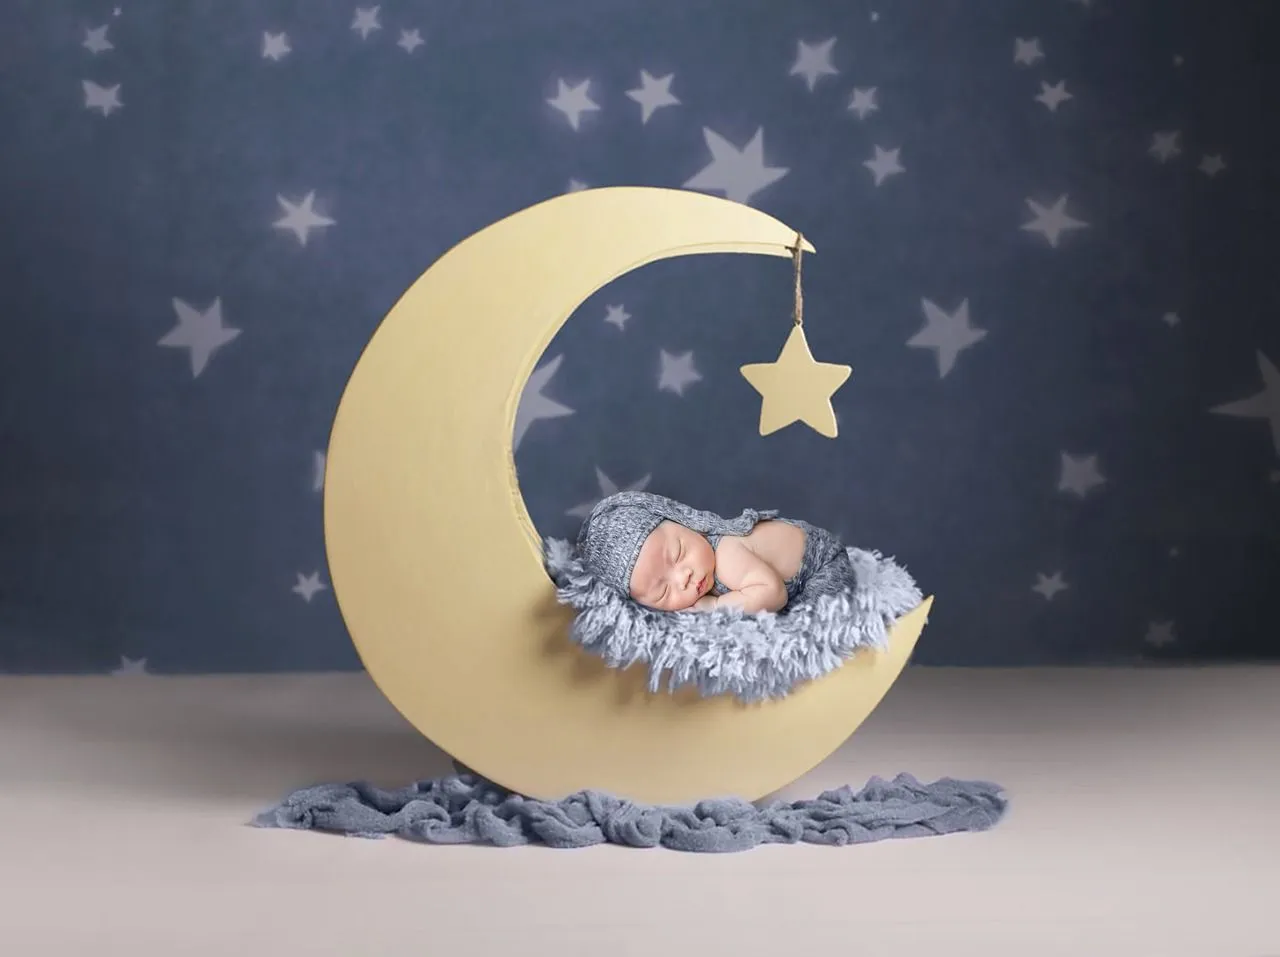 A newborn baby sleeping under the star in a moon shaped cradle